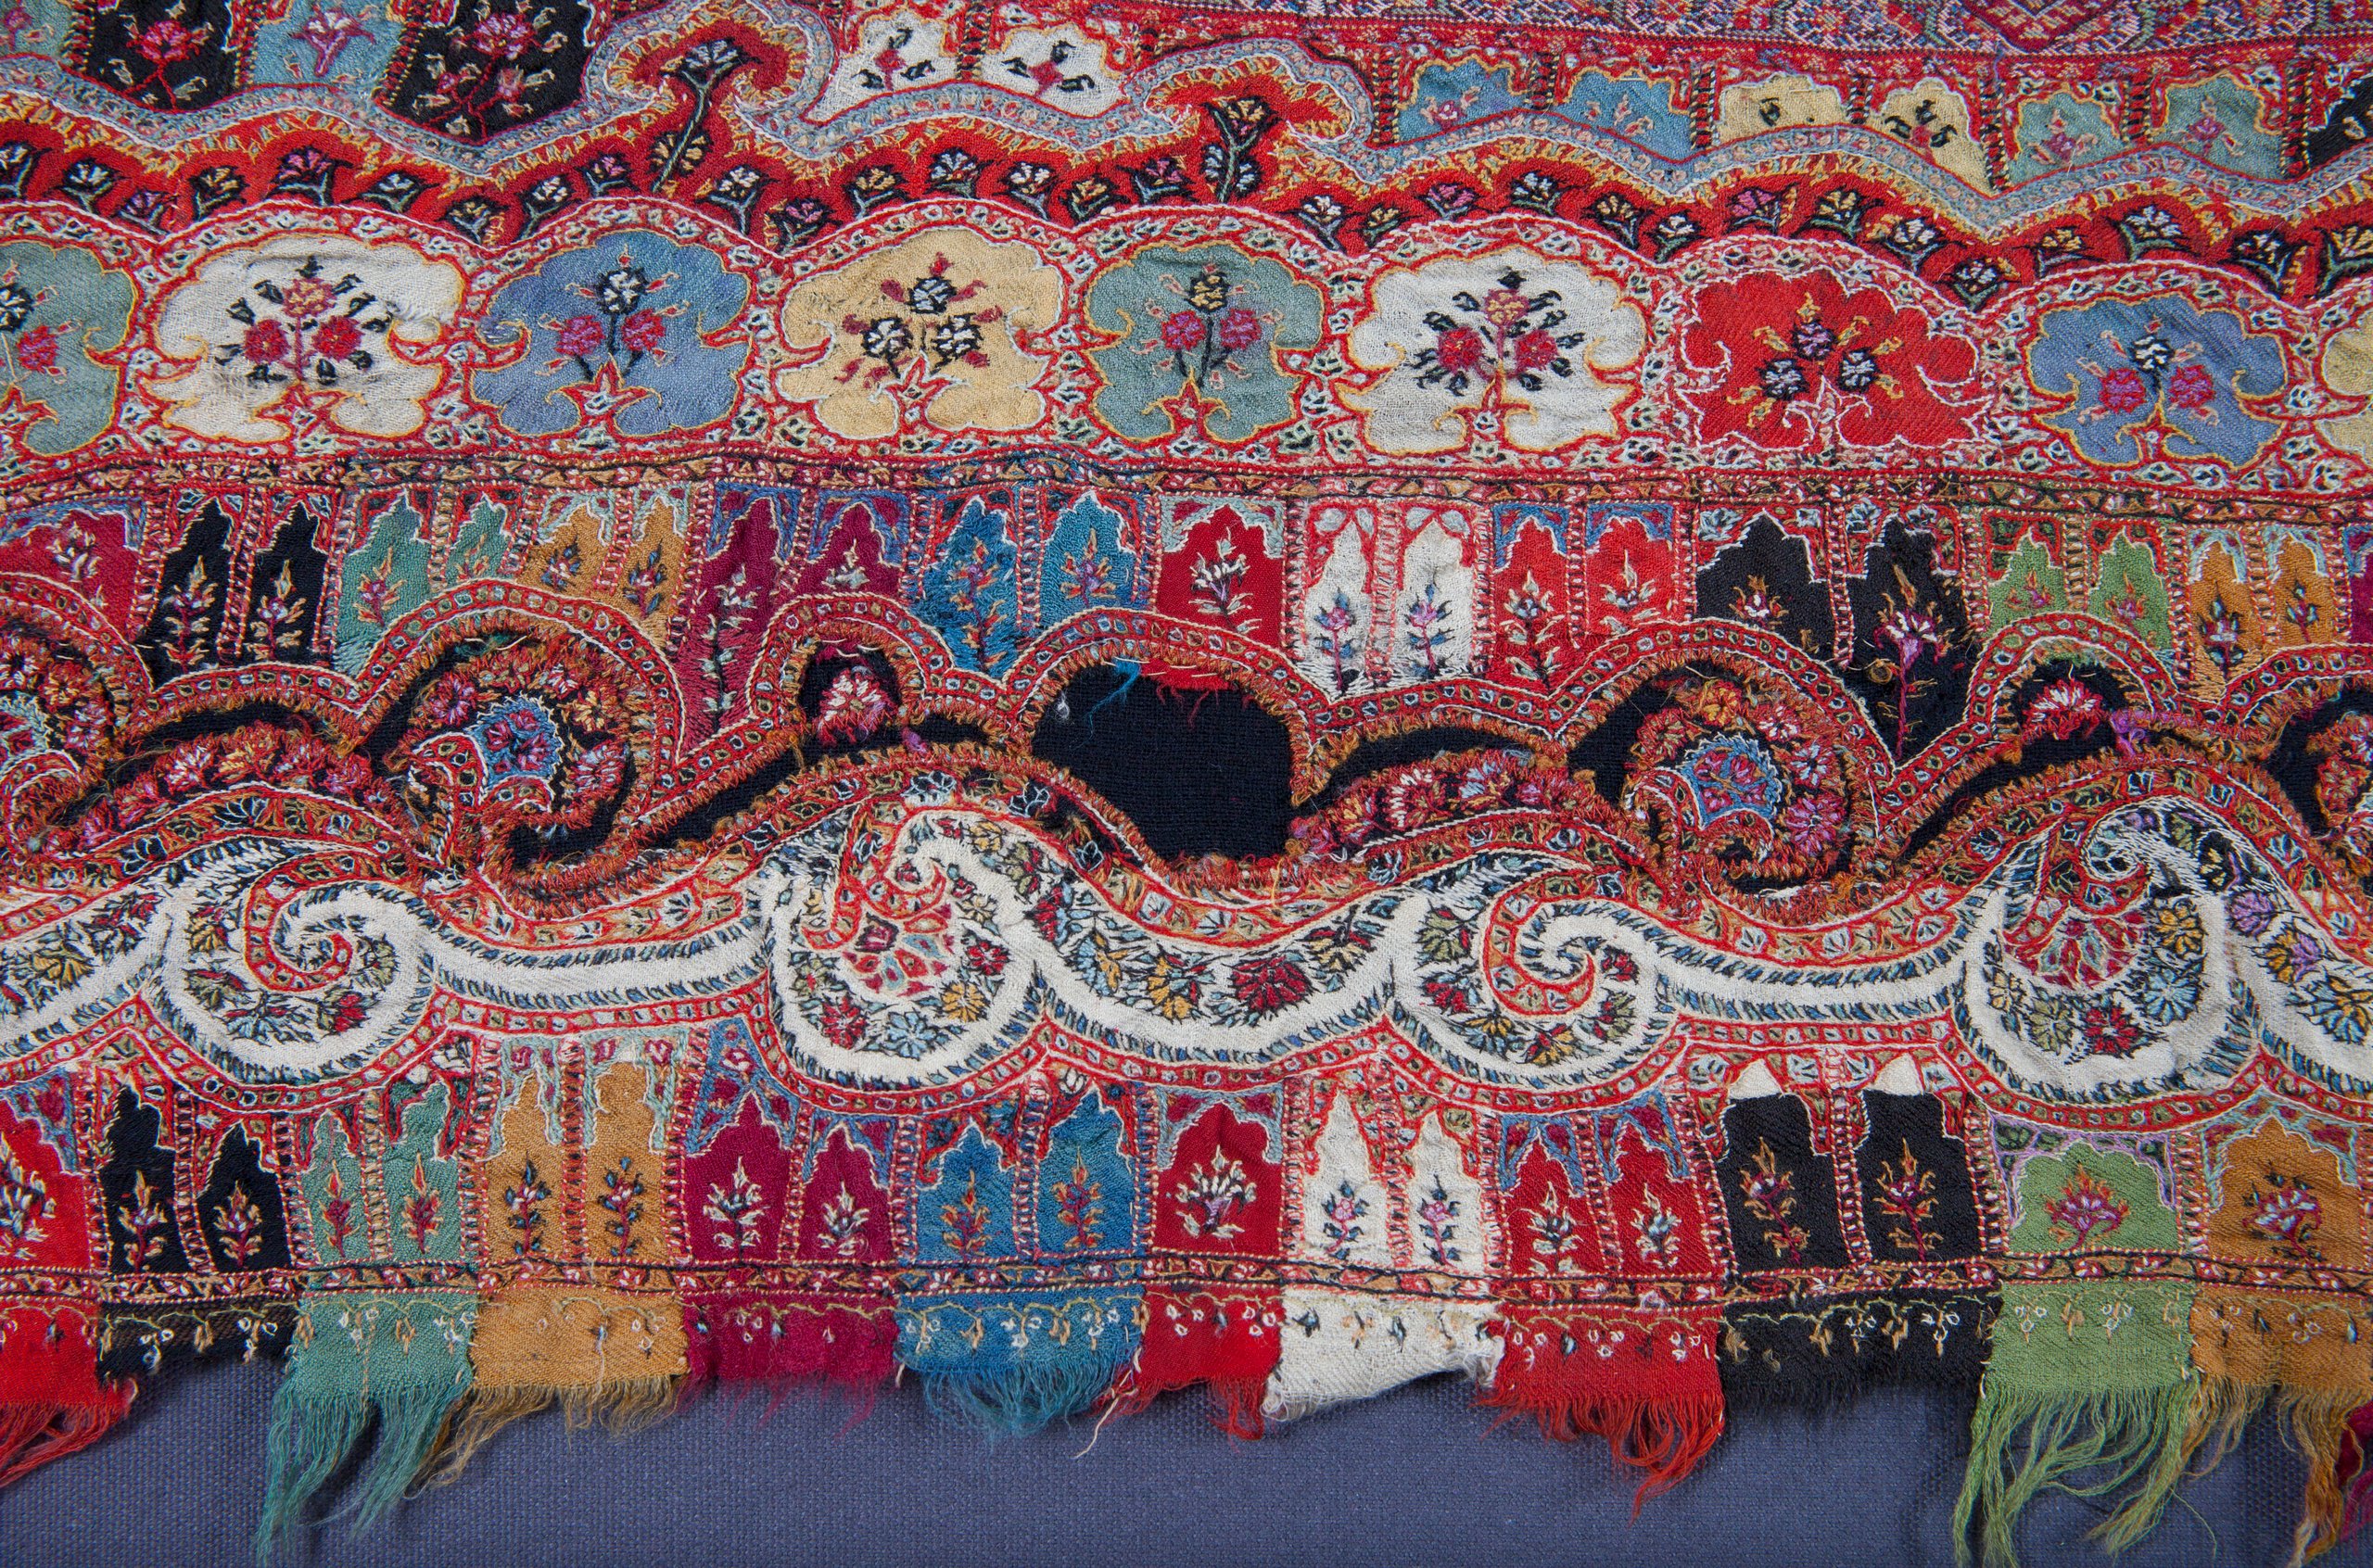 Pieced tapestry woven shawl, Kashmir